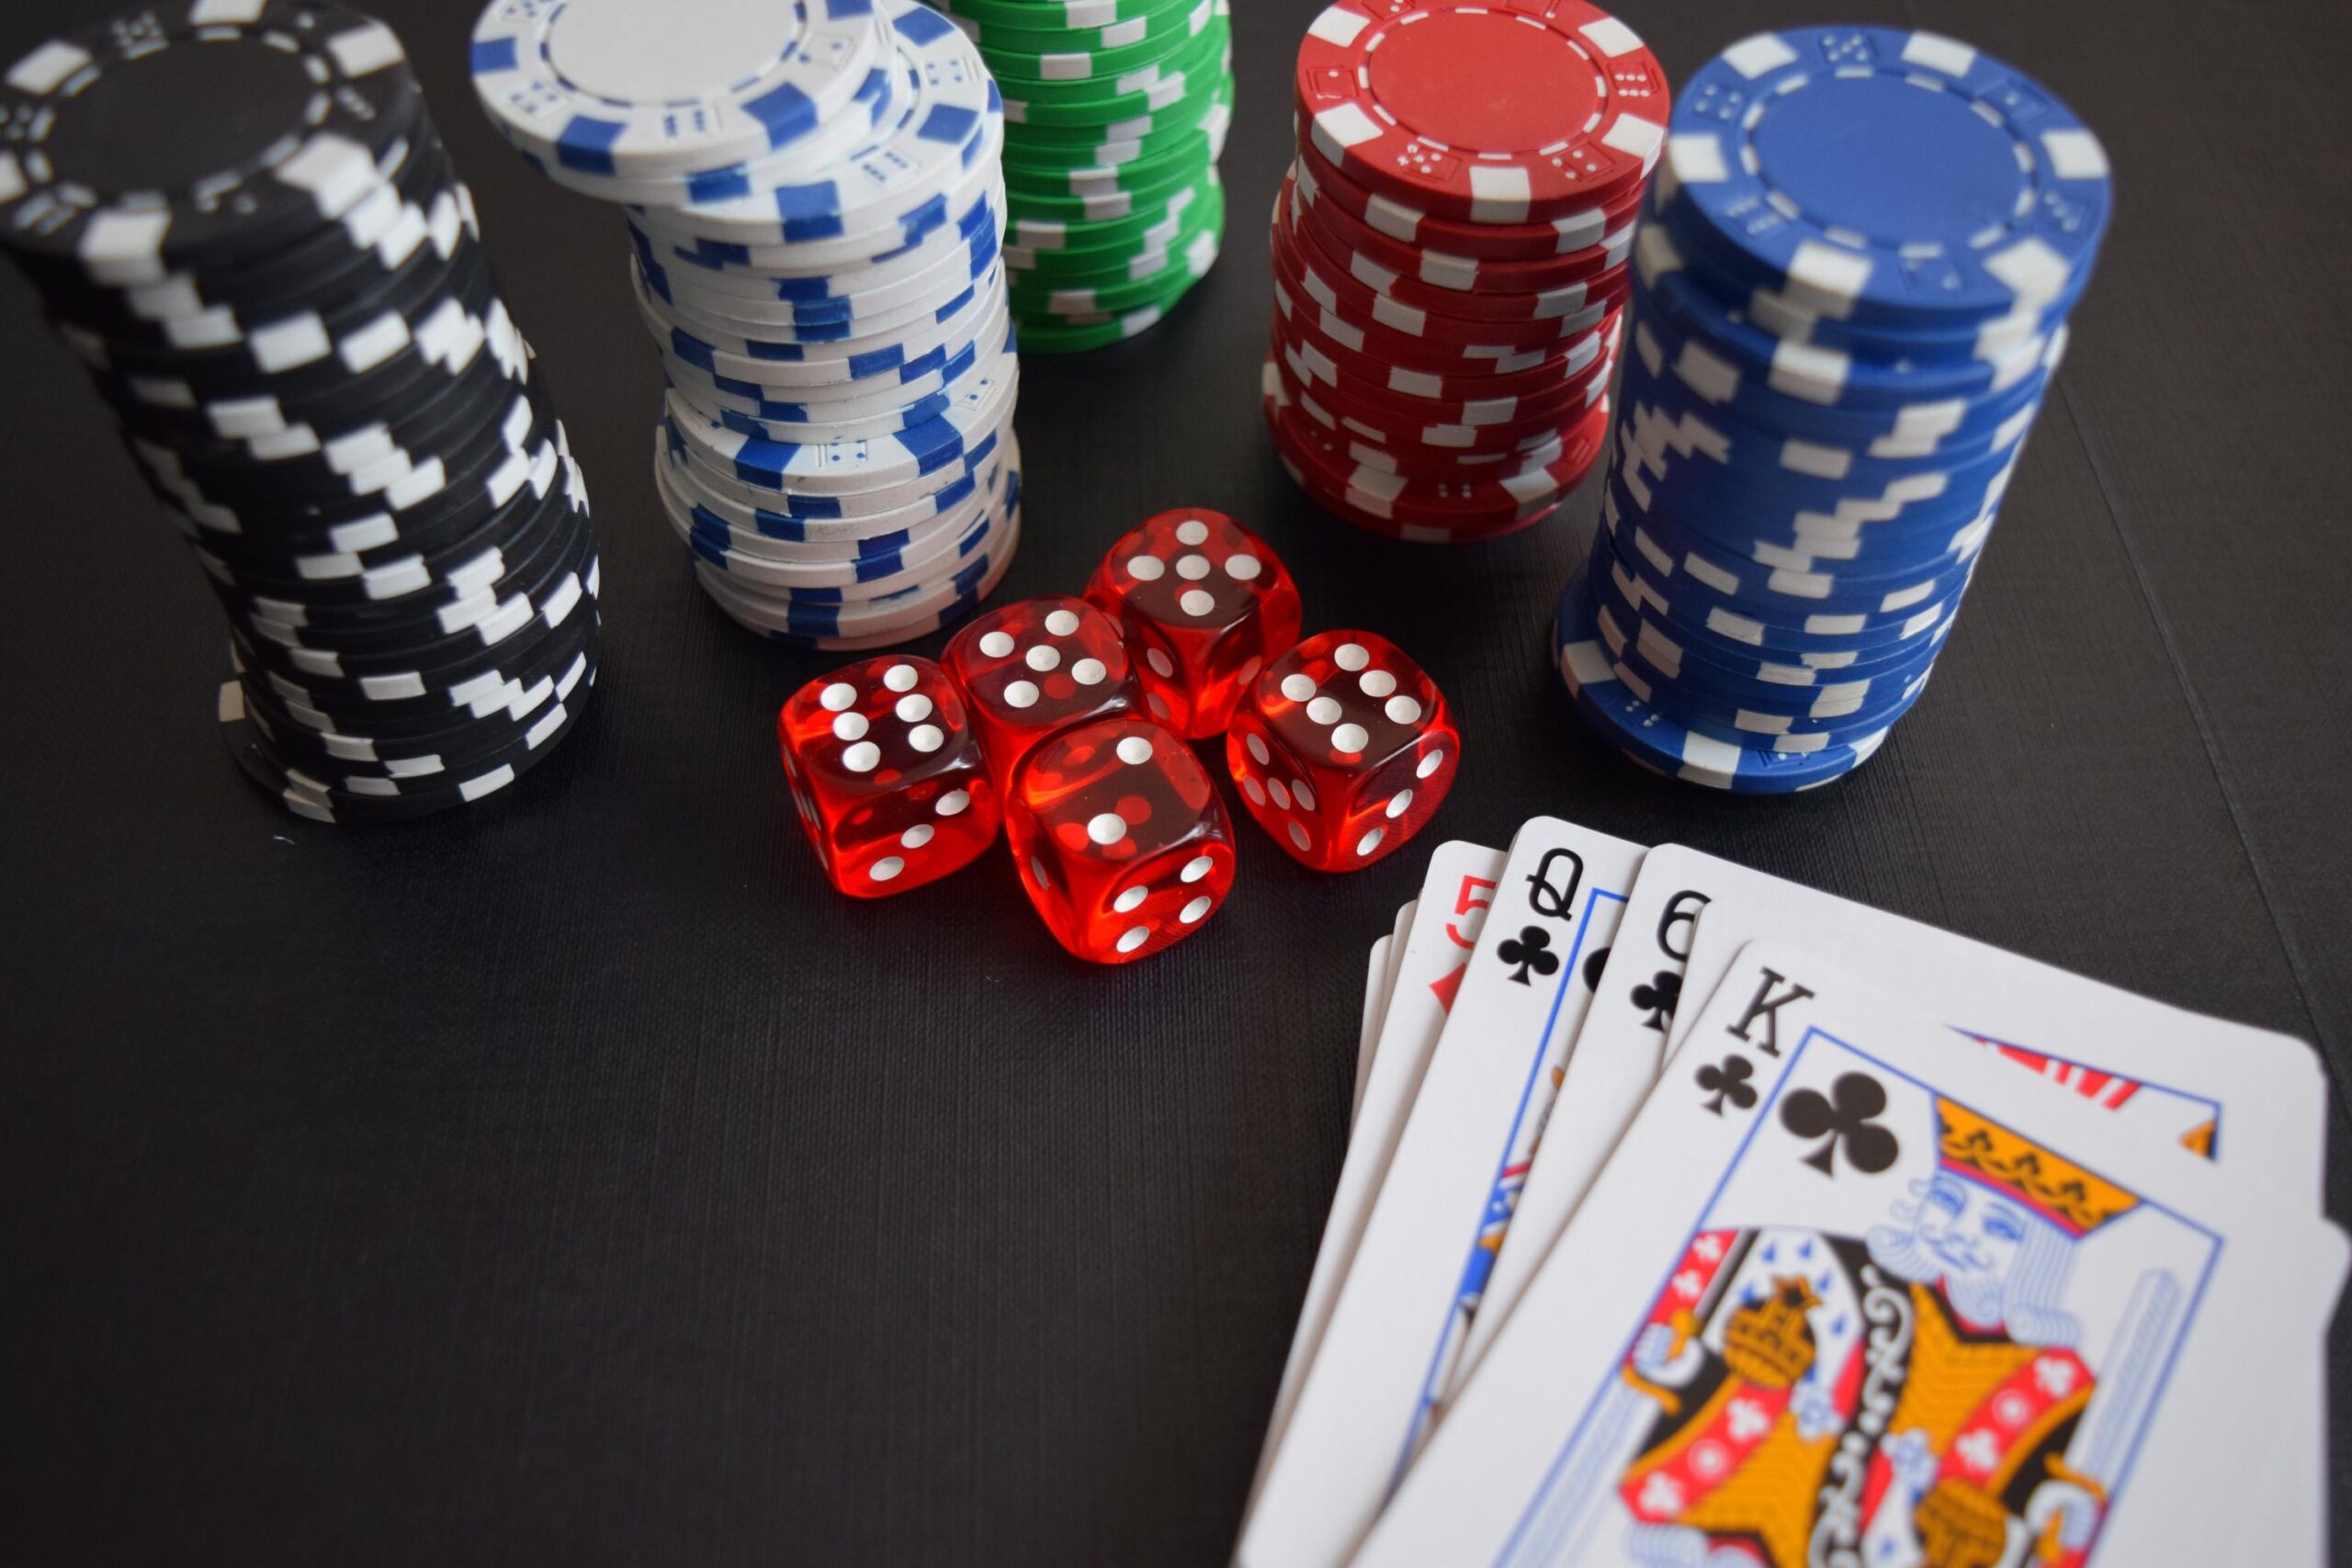 Which are the top 10 online casinos that offer a wide variety of live dealer games?